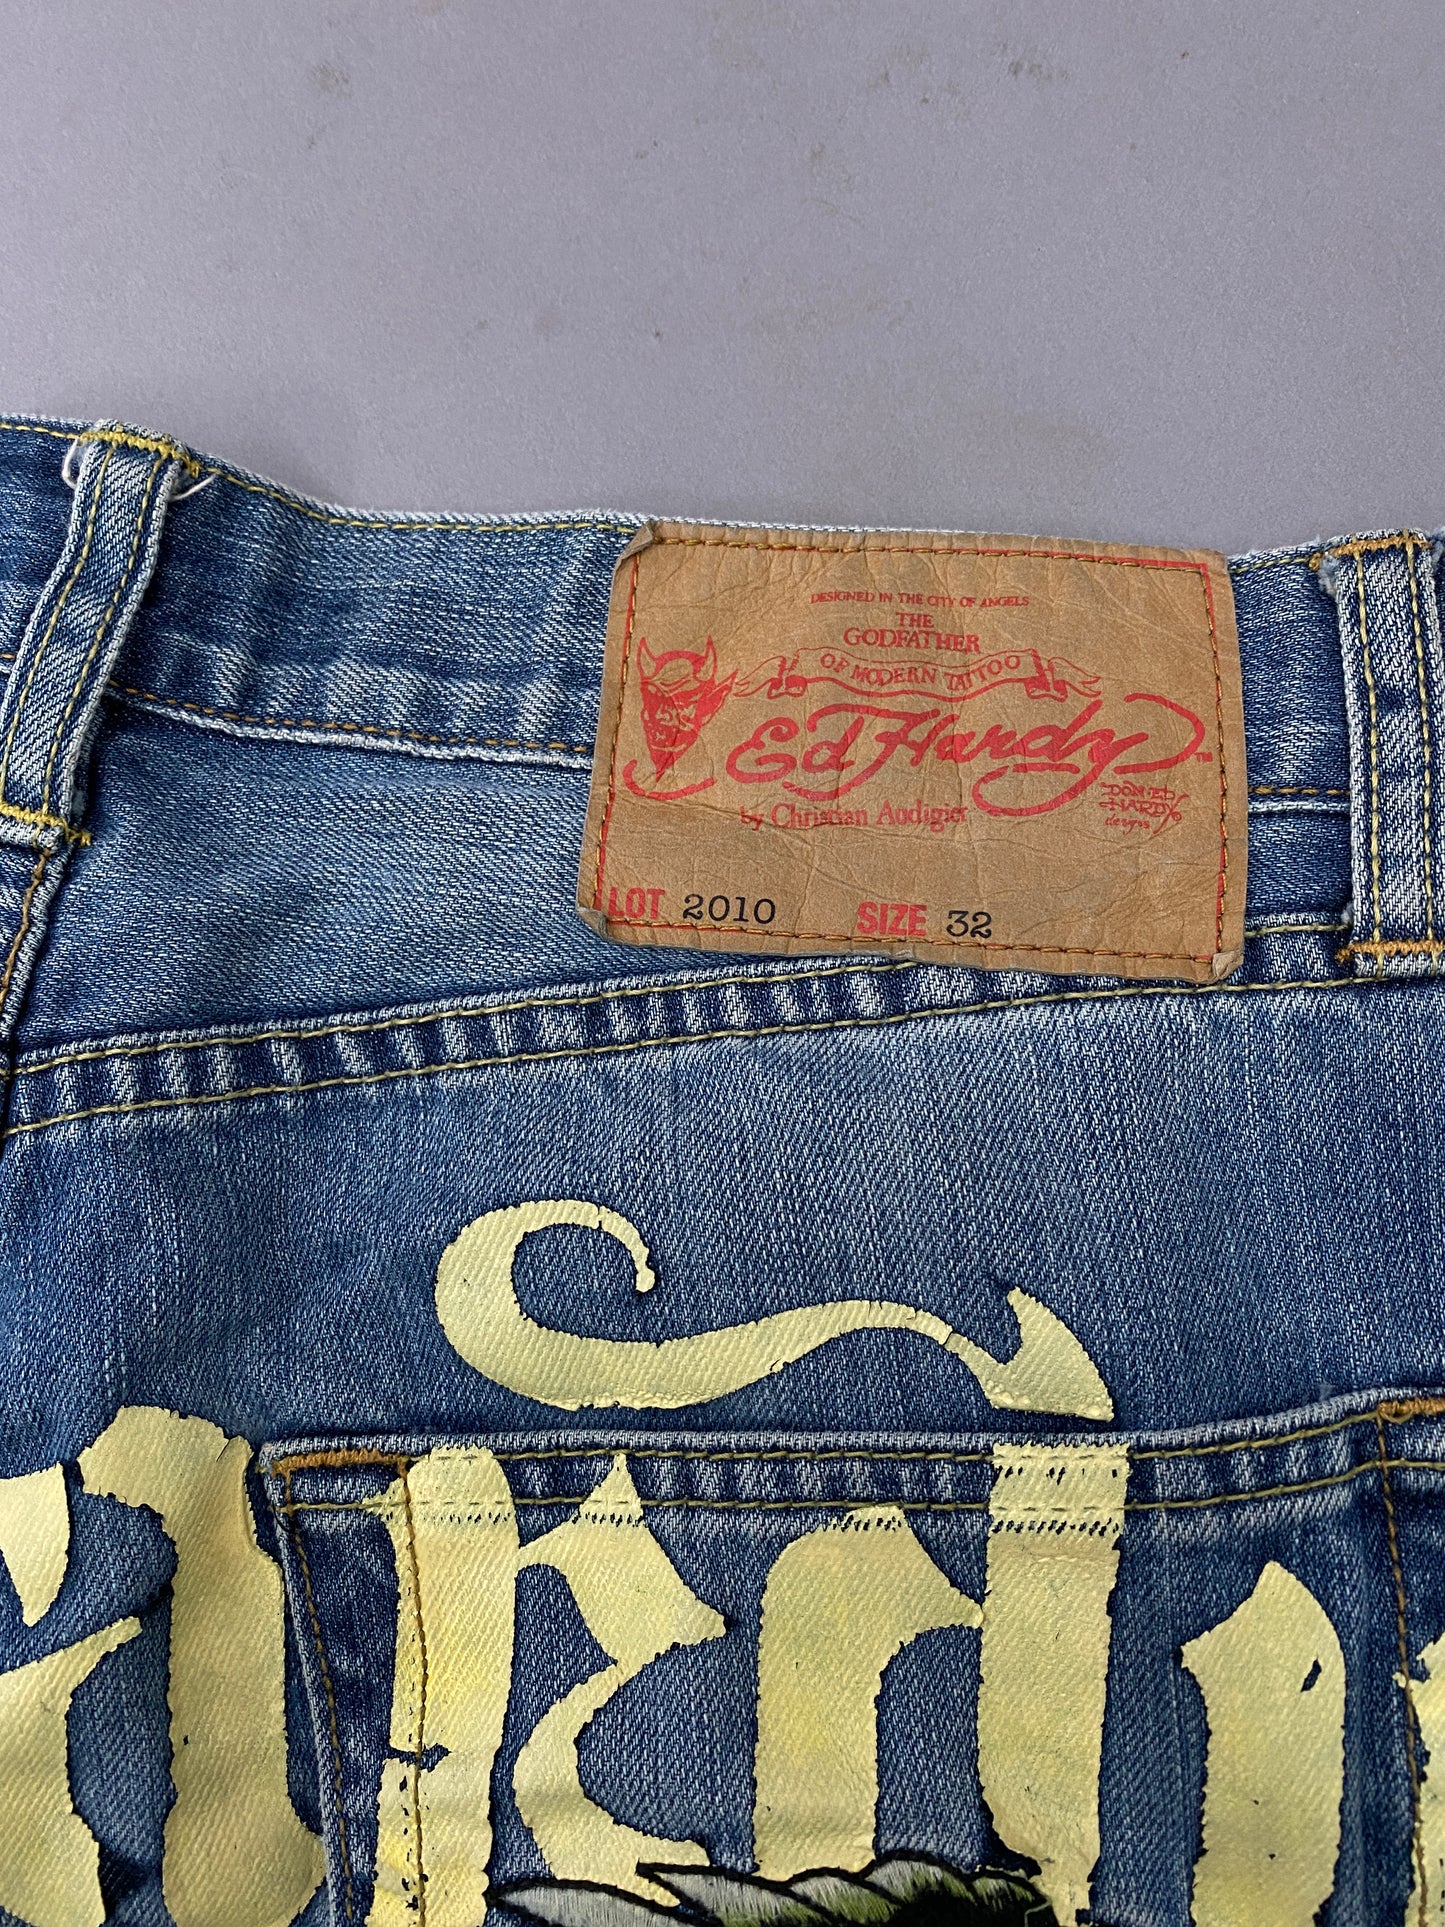 Ed Hardy Embroidered Jeans